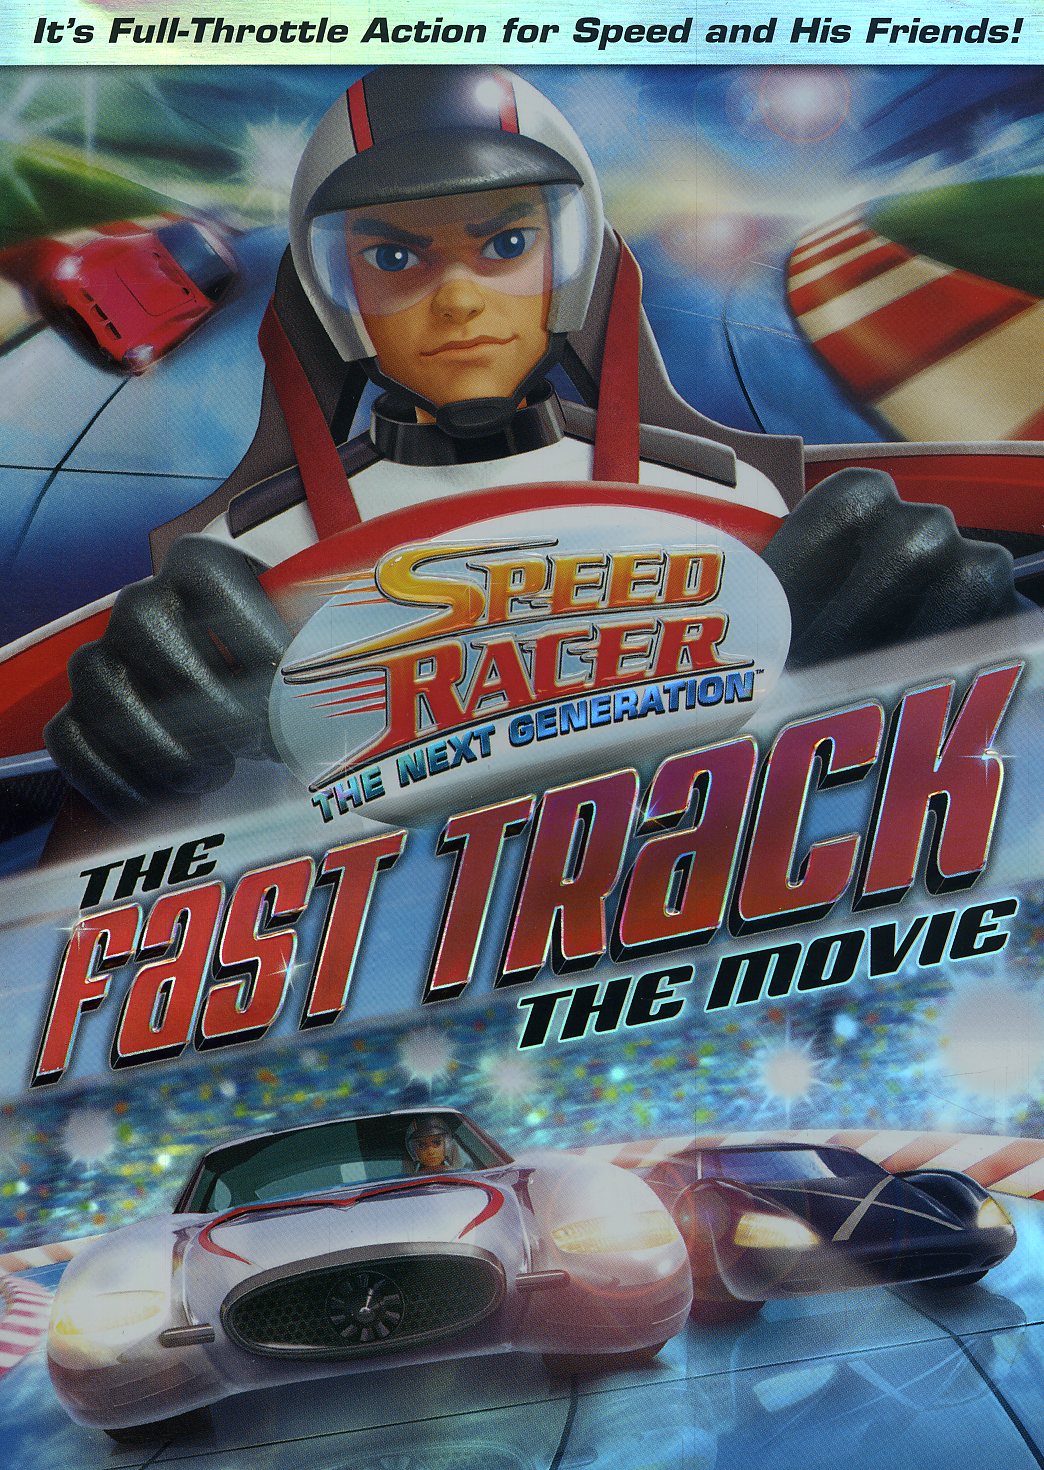 SPEED RACER: NEXT GENERATION - THE FAST TRACK